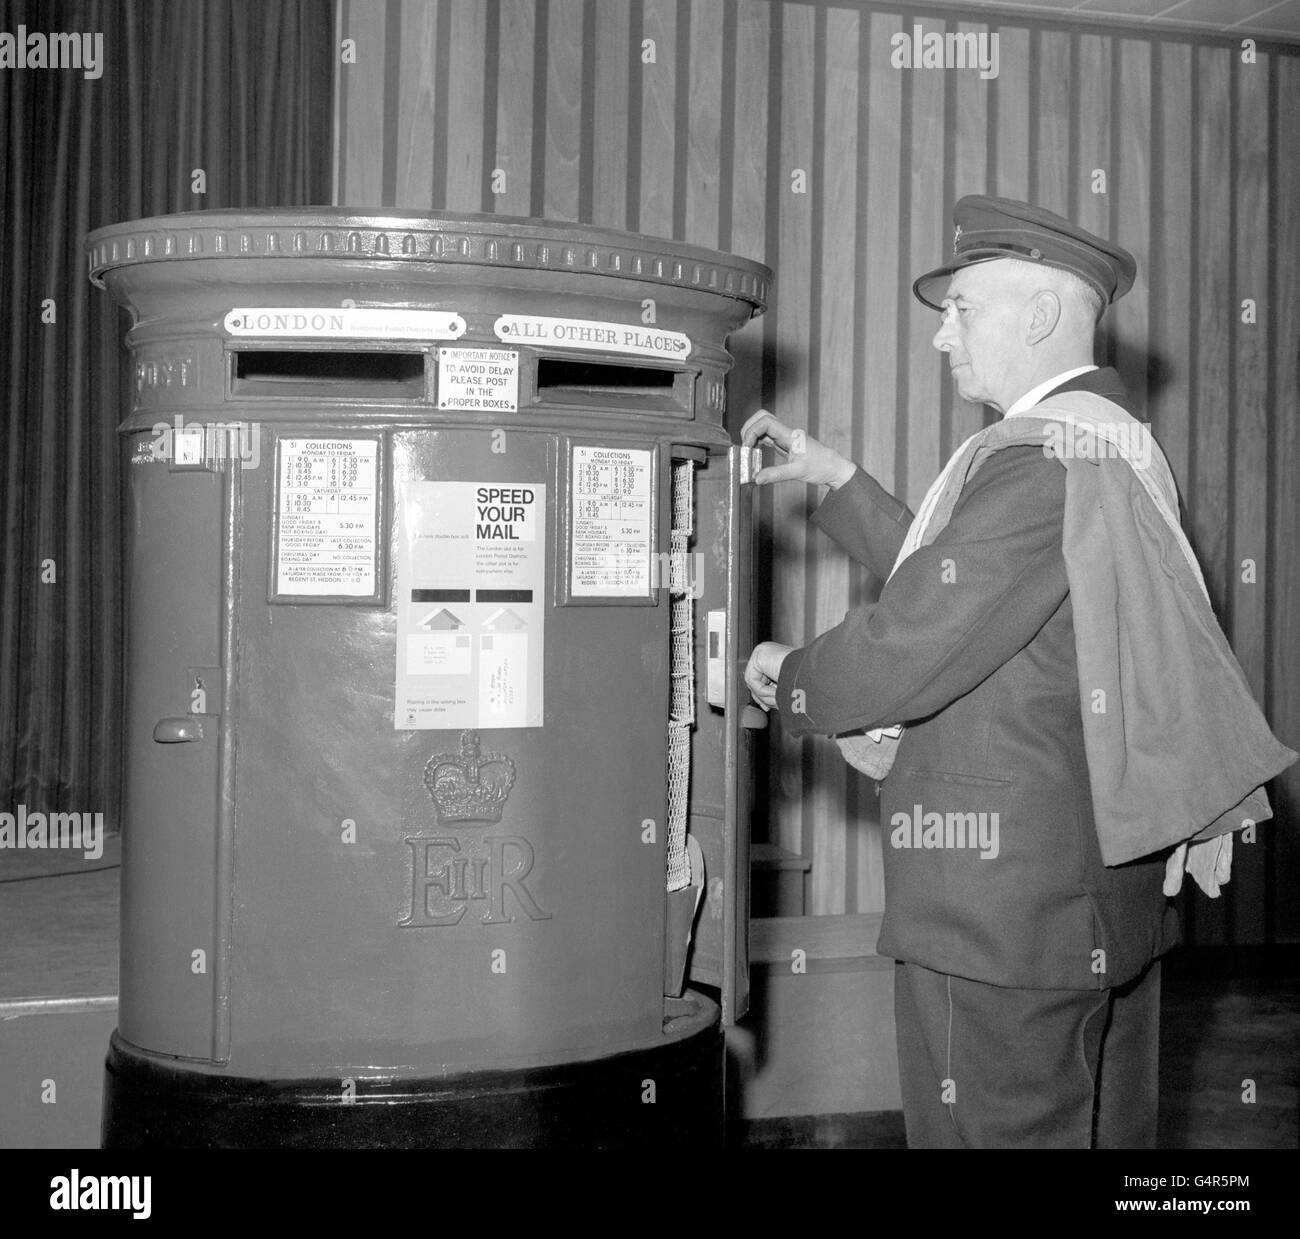 The new double-mouthed pillar box demonstrated at the GPO in London, which will be used to speed up the mail in Central London. One section is for London letters, the other for 'all other places'. But, of course, the scheme depends upon mail being placed in the correct box. Stock Photo